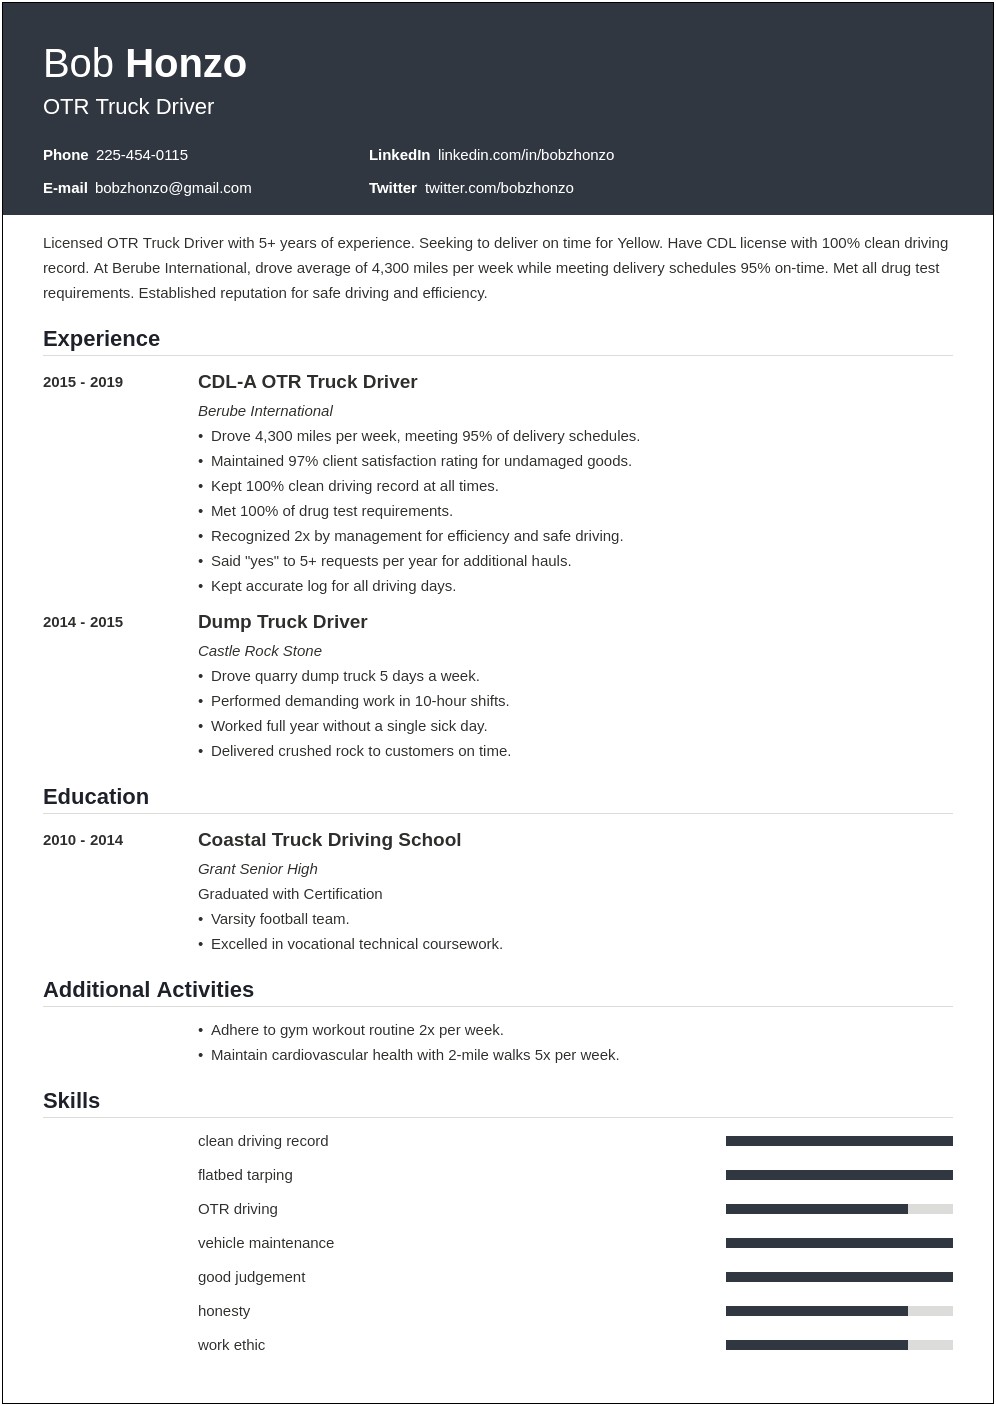 Sample Resume Objective For Driver Position